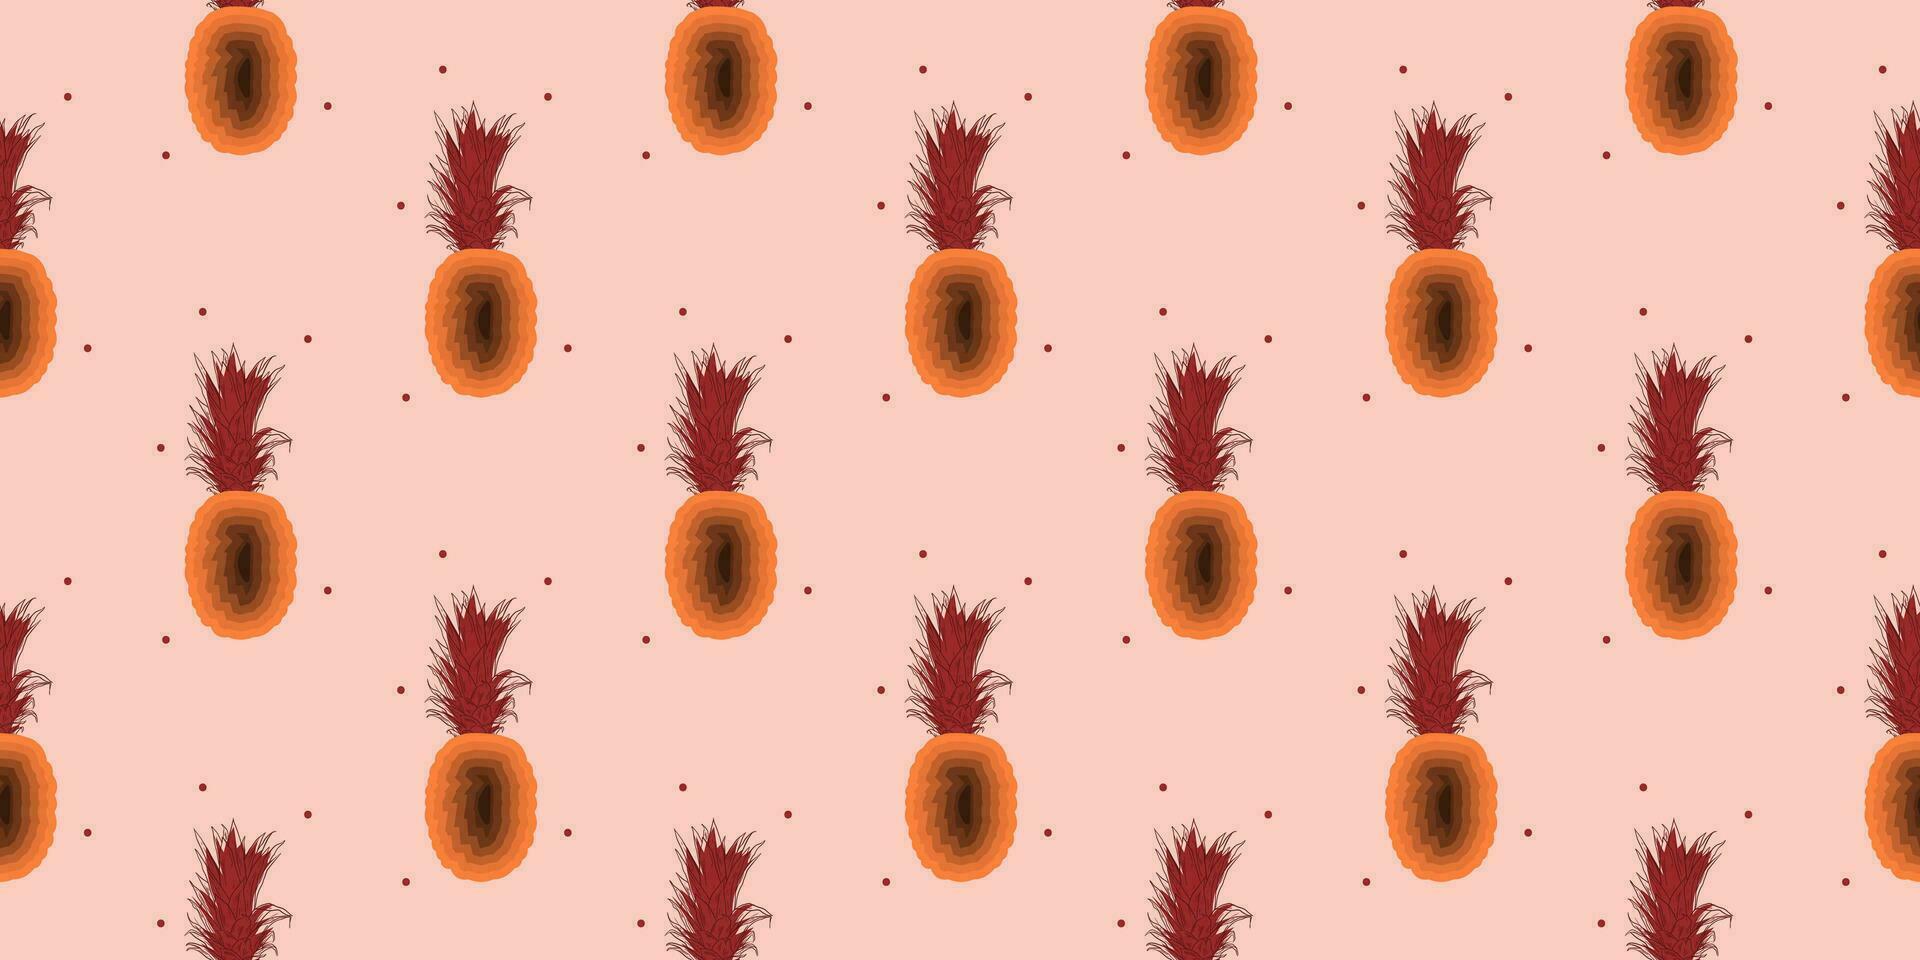 uniek abstract zomer ananas fruit naadloos patroon achtergrond vector